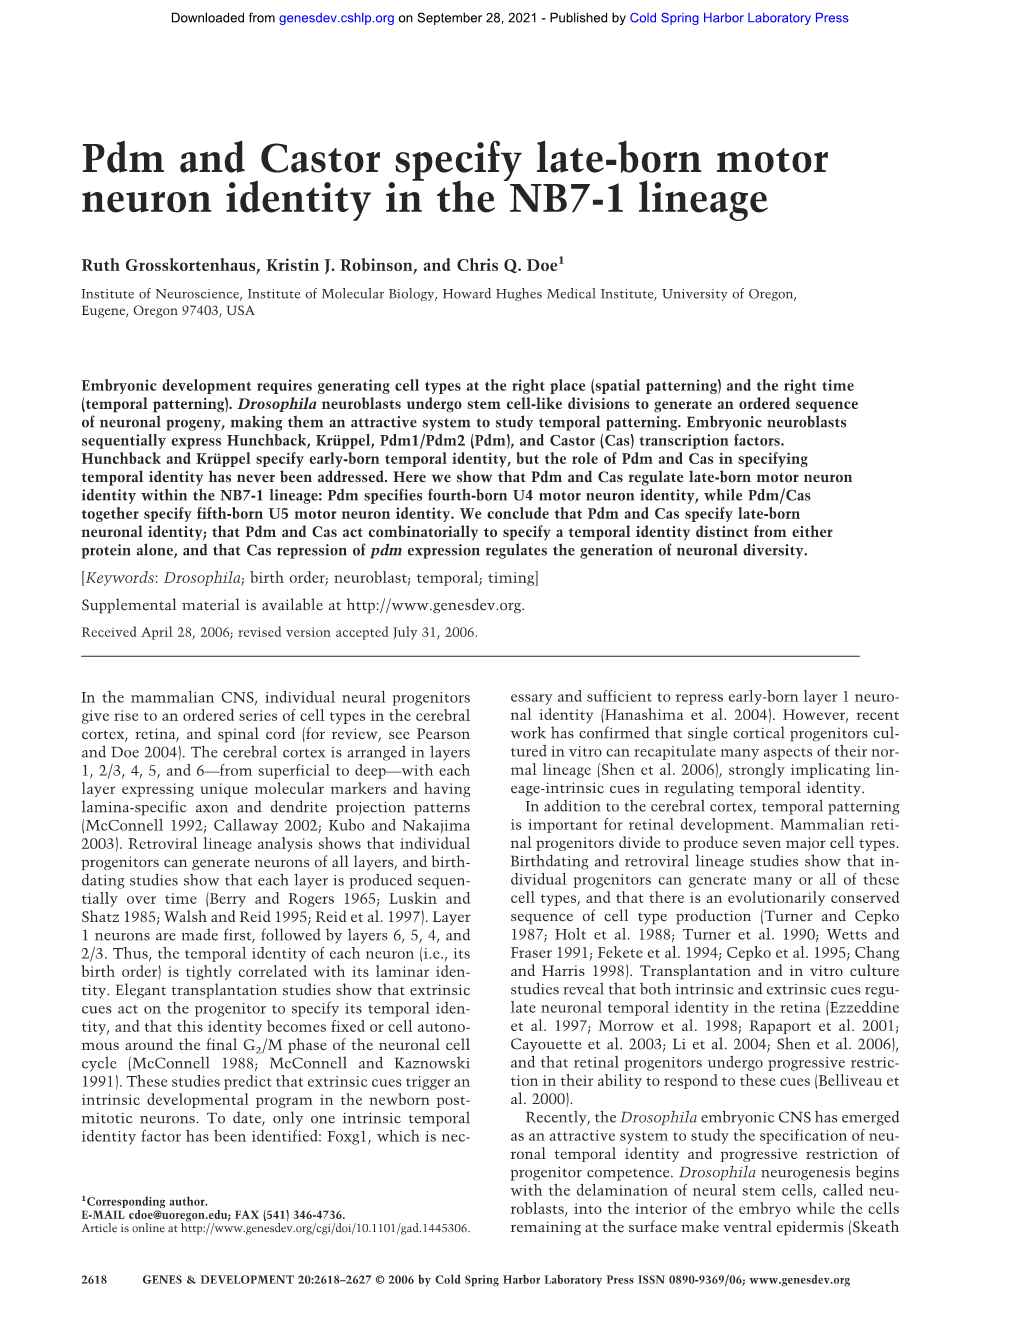 Pdm and Castor Specify Late-Born Motor Neuron Identity in the NB7-1 Lineage